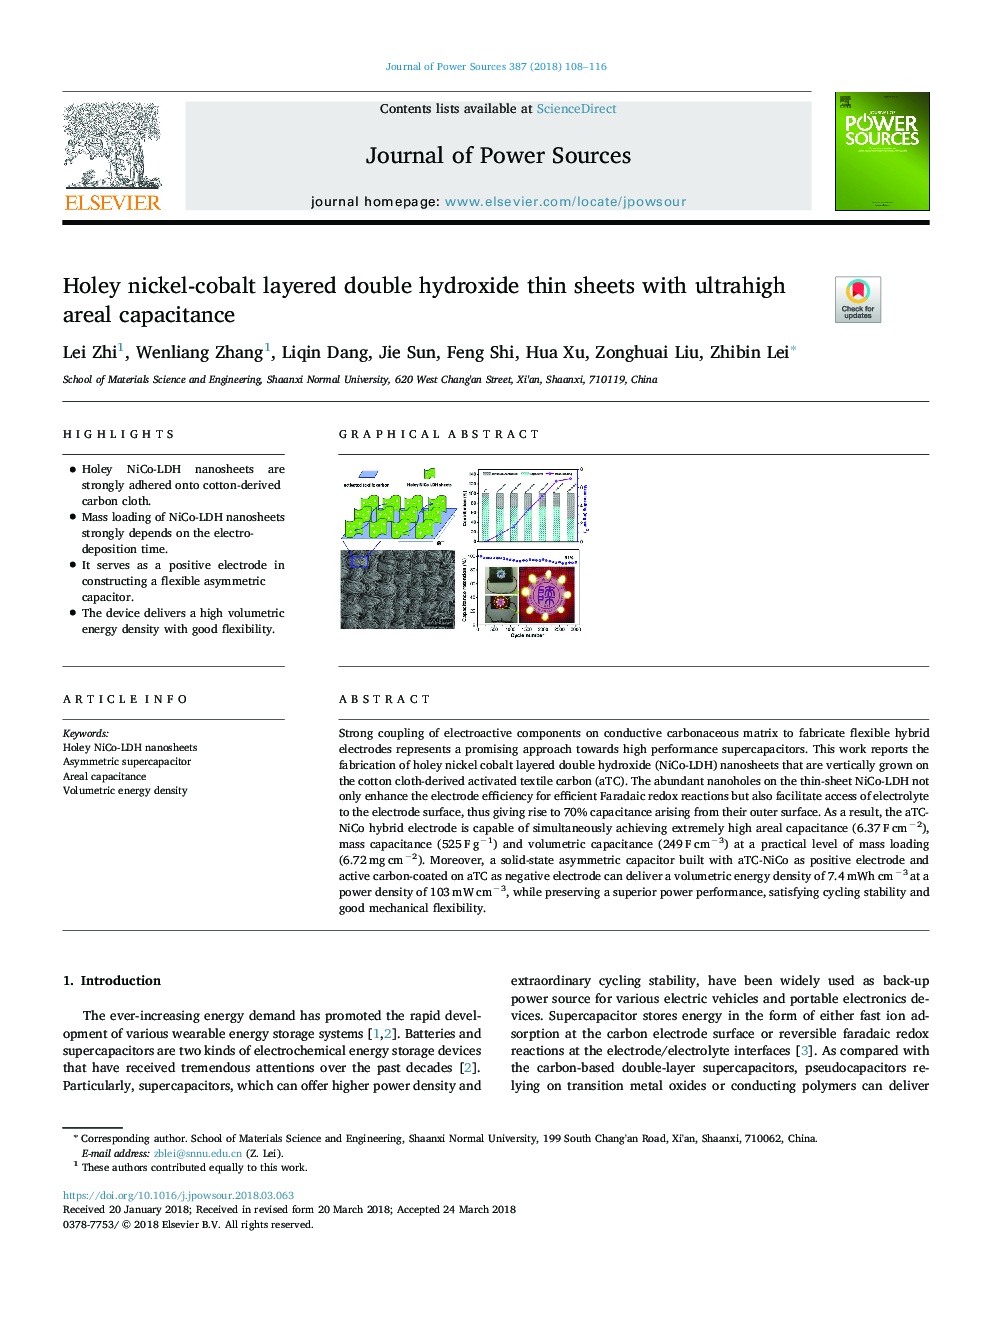 Holey nickel-cobalt layered double hydroxide thin sheets with ultrahigh areal capacitance